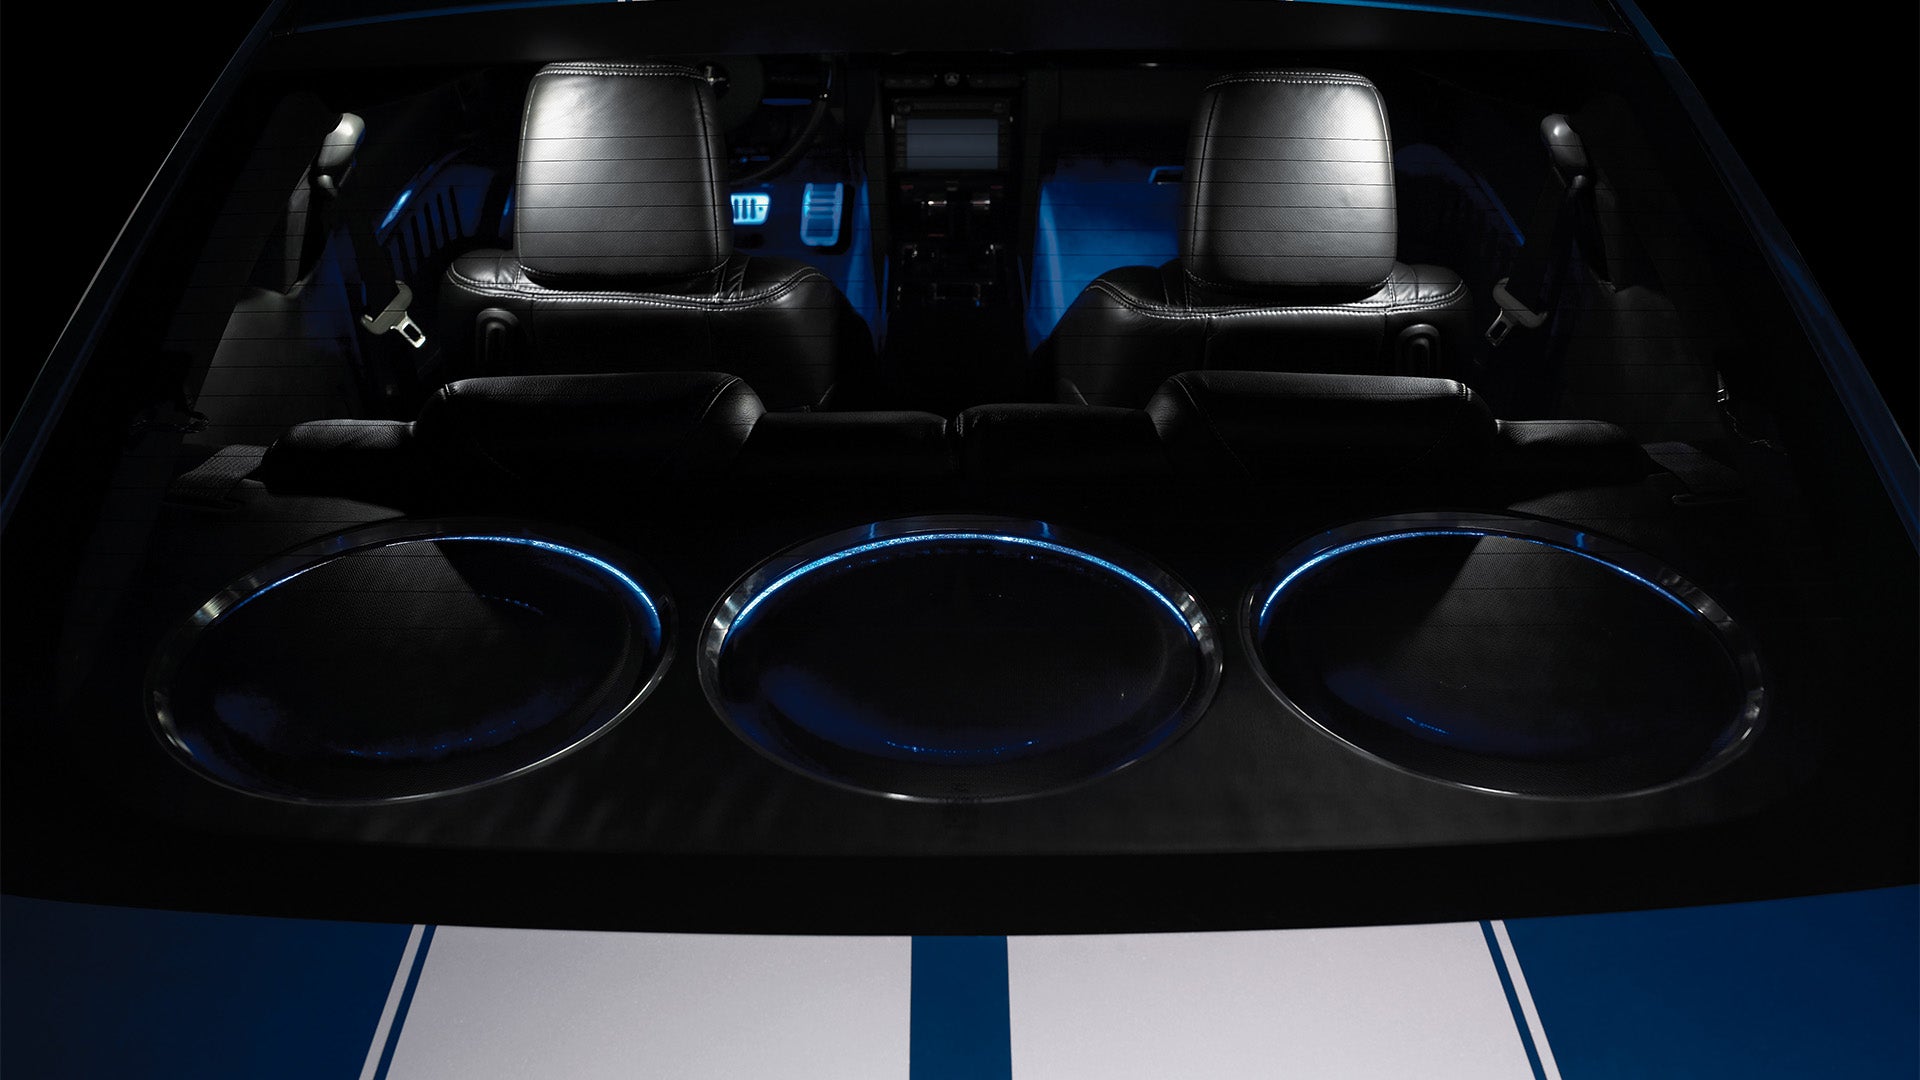 A series of 3 TW5v2 car audio subwoofer units installed in the back of a vehicle.